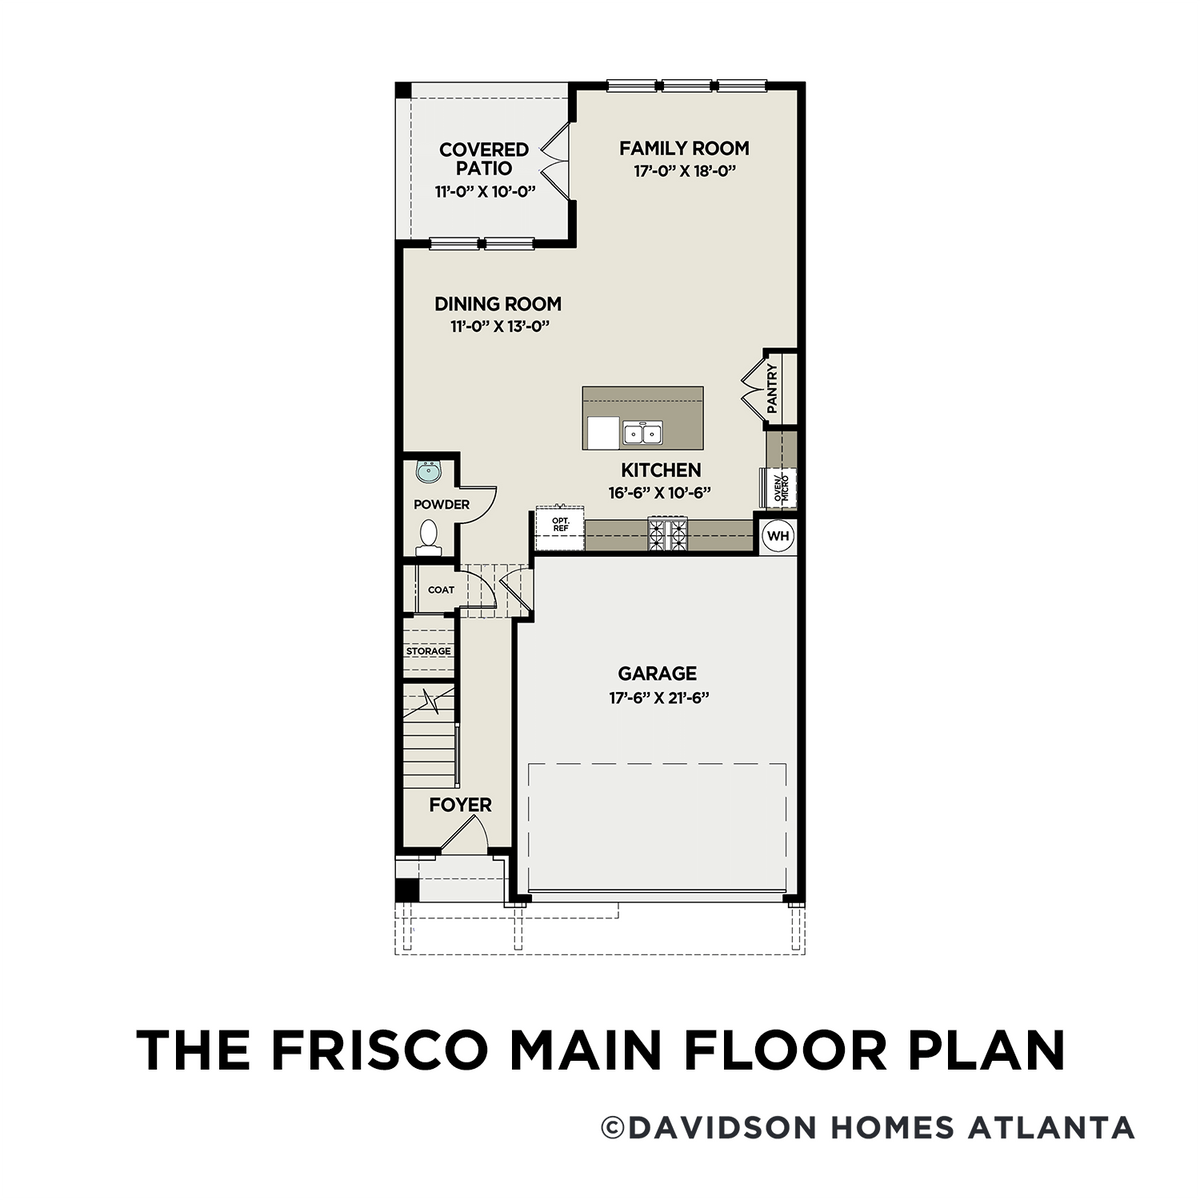 1 - The Frisco A buildable floor plan layout in Davidson Homes' The Village at Towne Lake community.